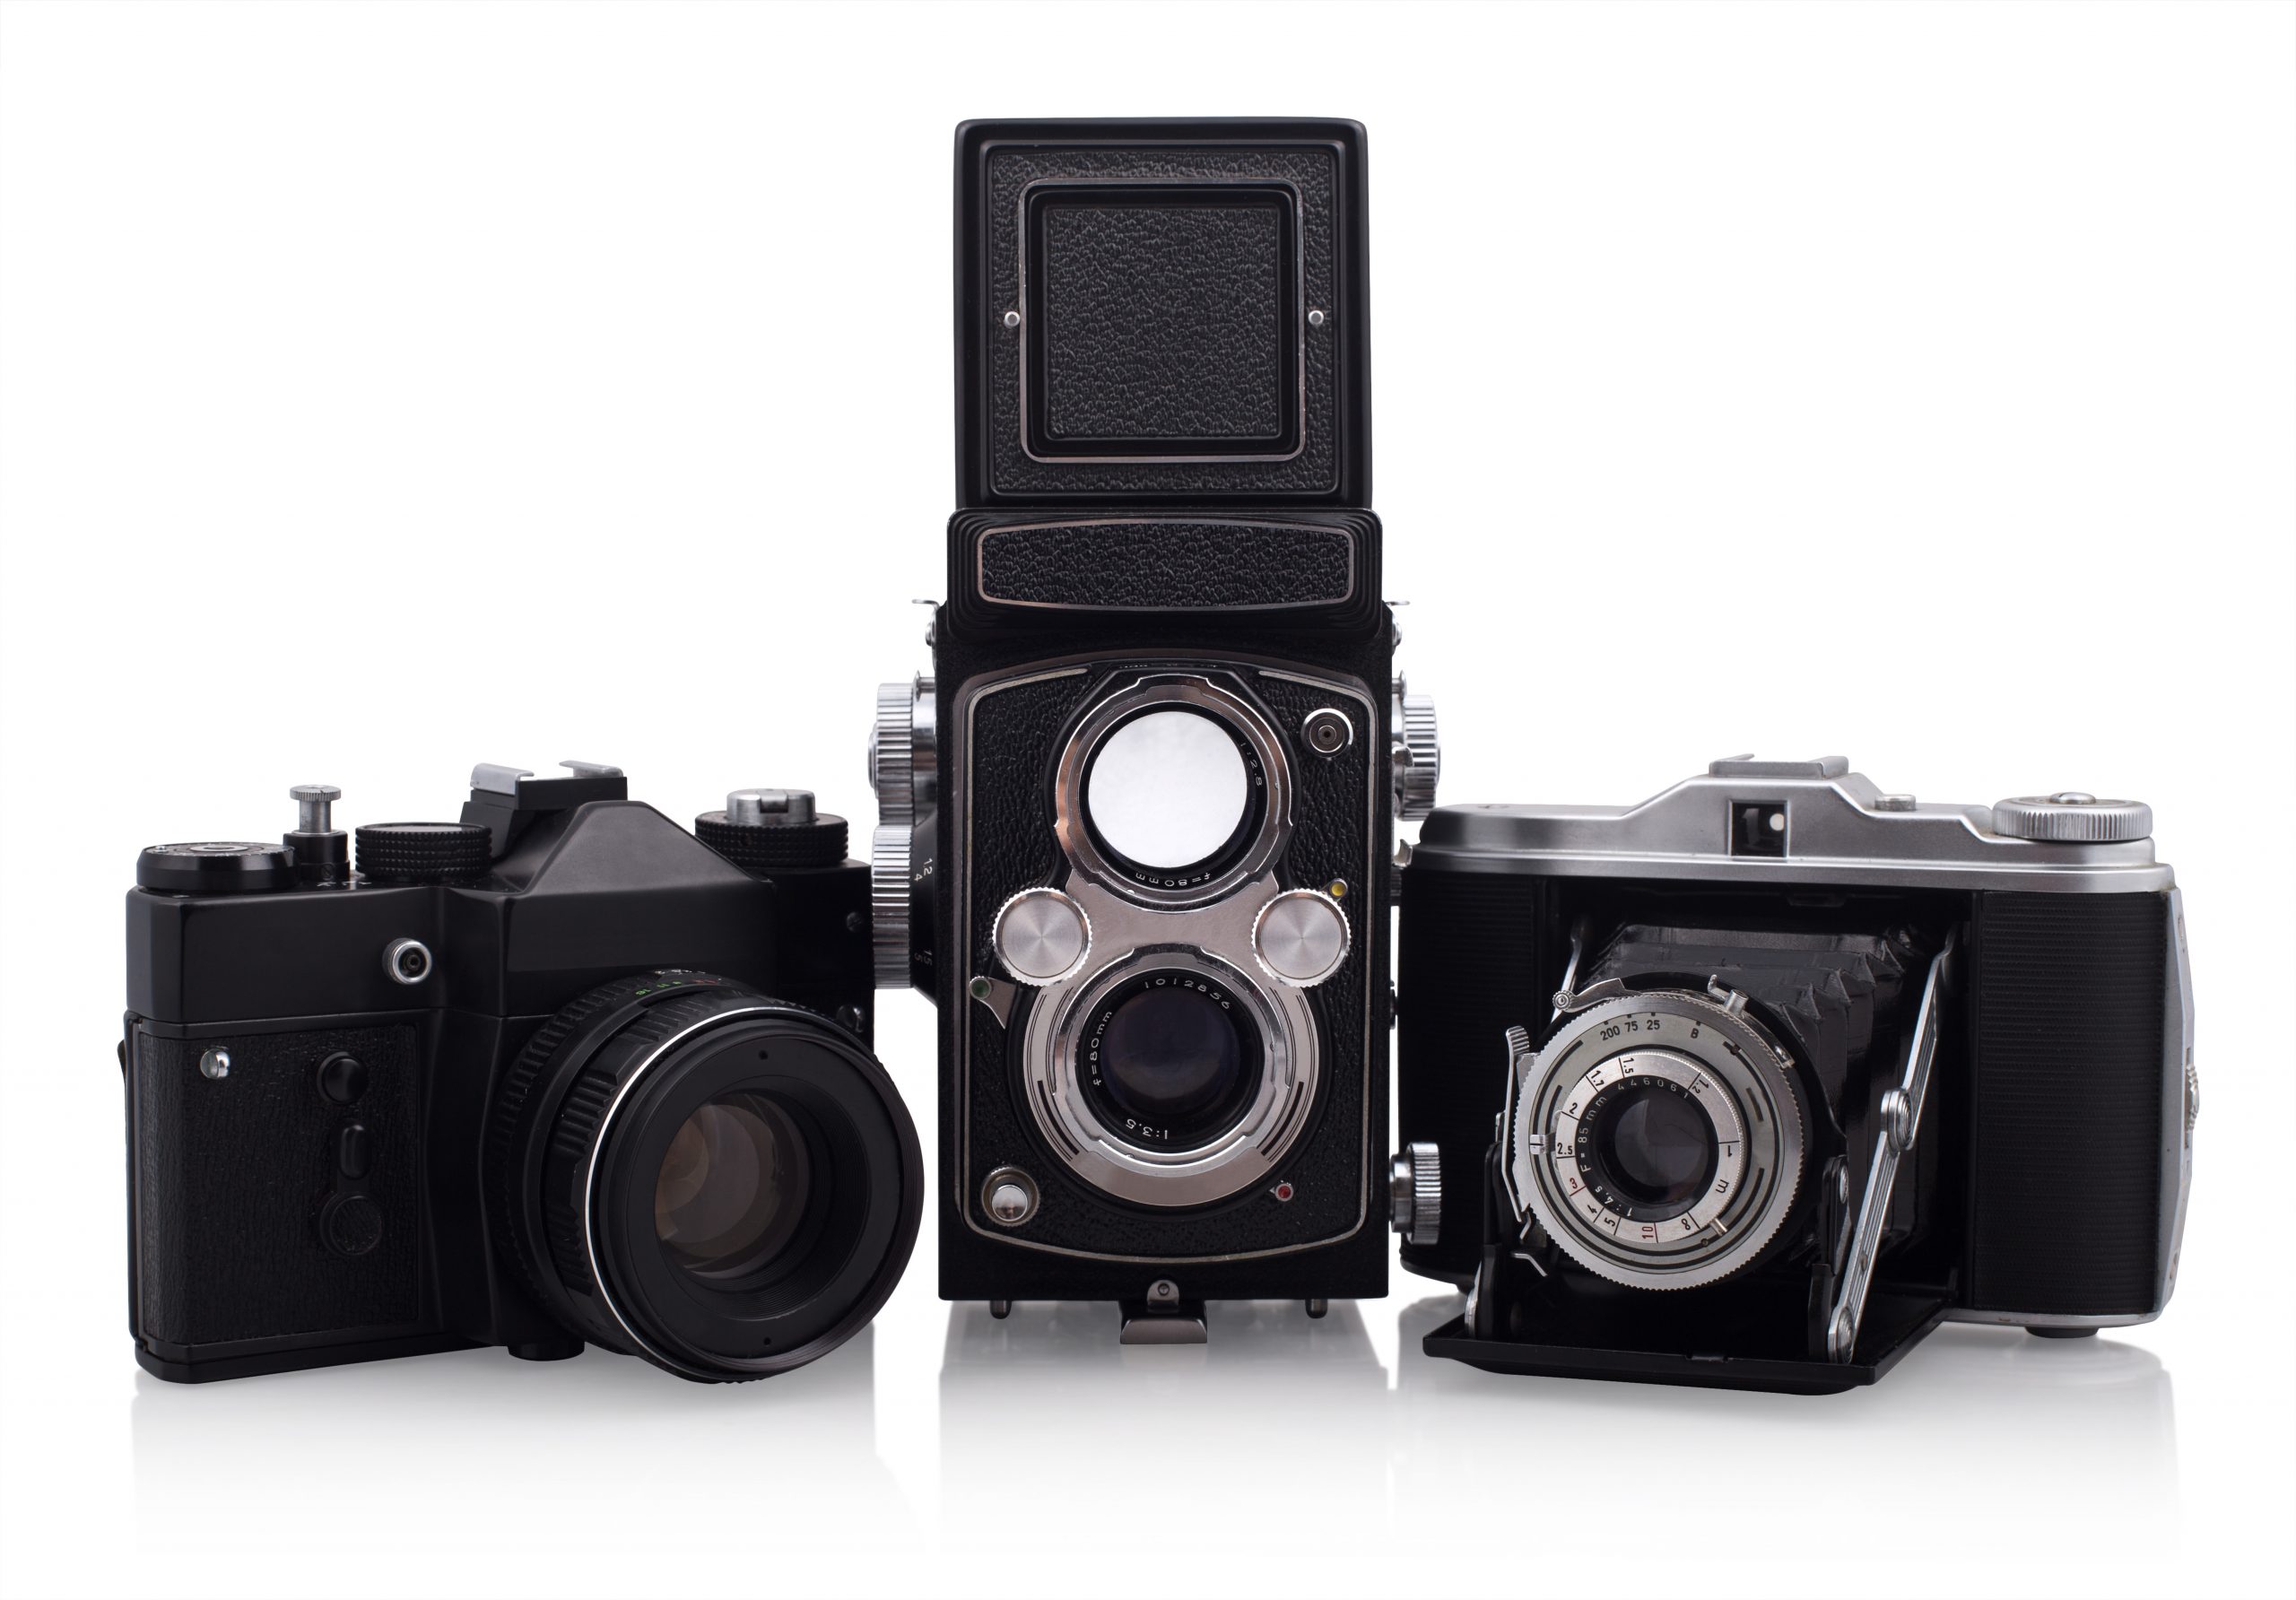 film cameras can be affordable in the secondary market